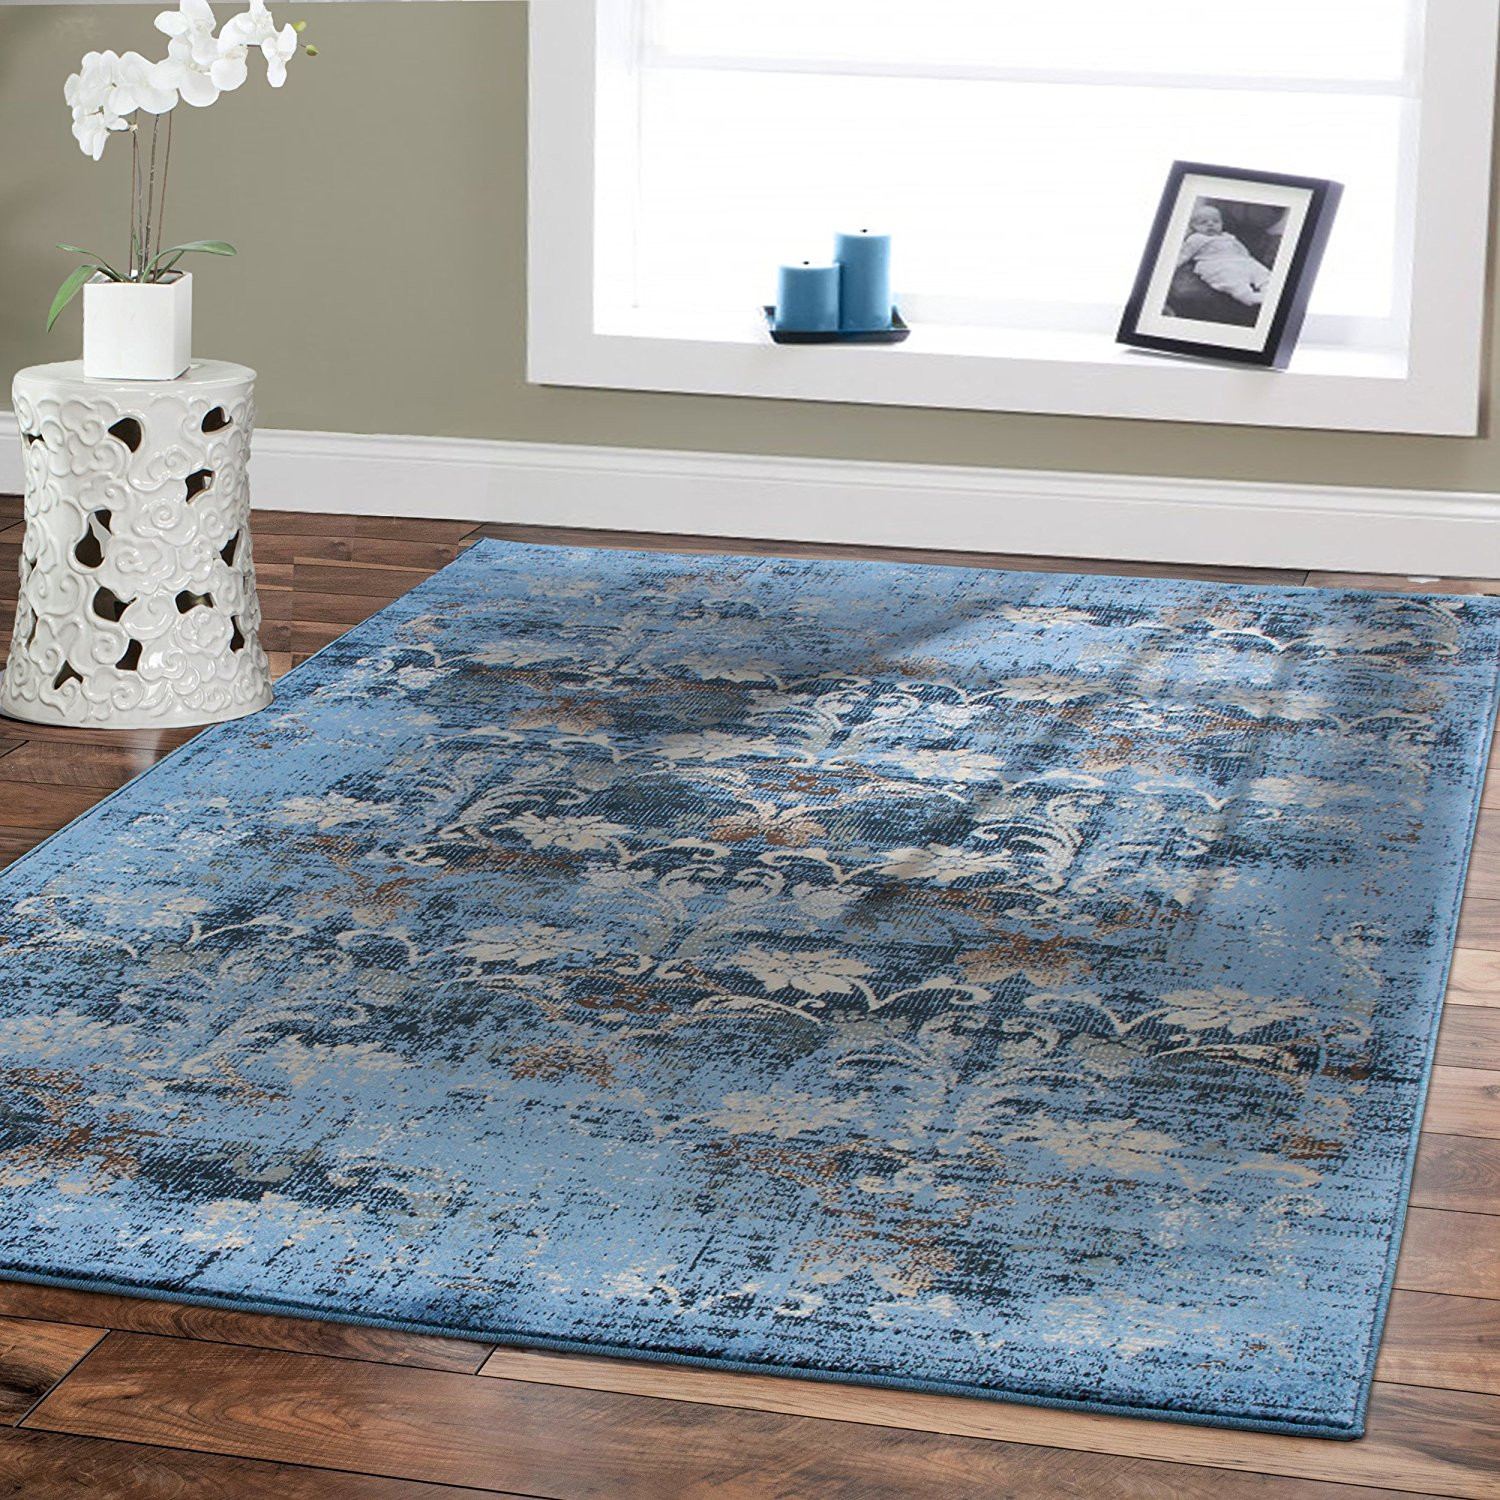 Living Room Area Rugs 8X10
 Premium Rugs 8x11 Rugs for Living Room 8x10 Area